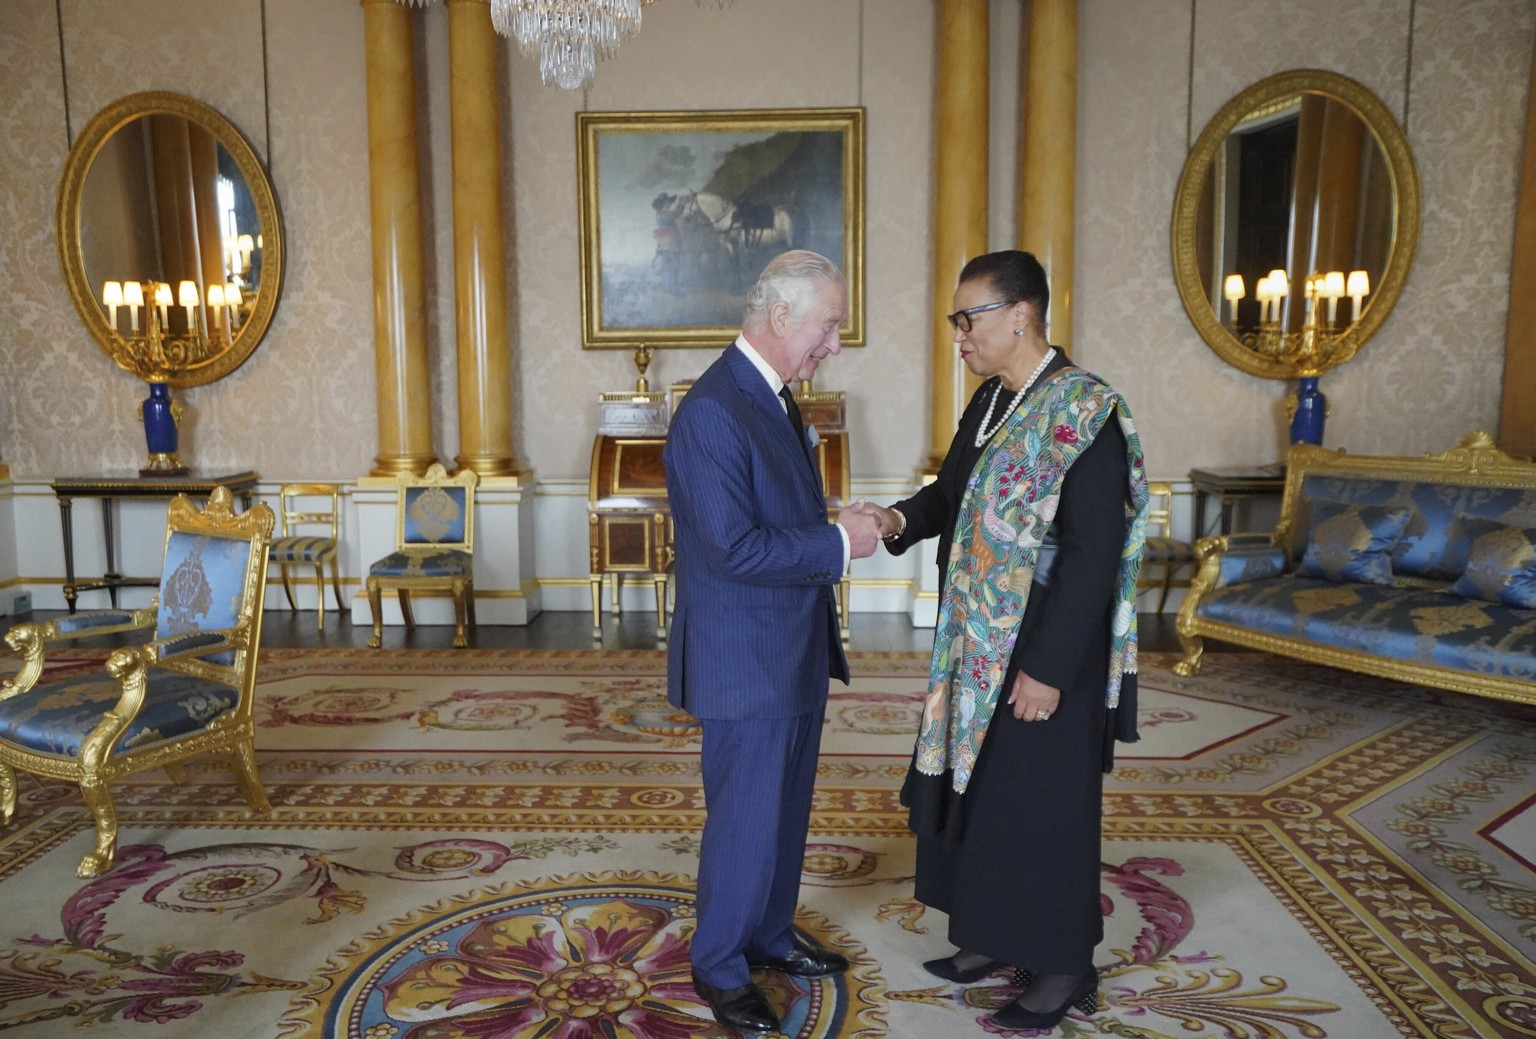 King Charles III during an audience with the Commonwealth Secretary General Baroness Patricia Scotland at Buckingham Palace, London, Sunday, Sept. 11, 2022. (Victoria Jones/Pool Photo via AP)